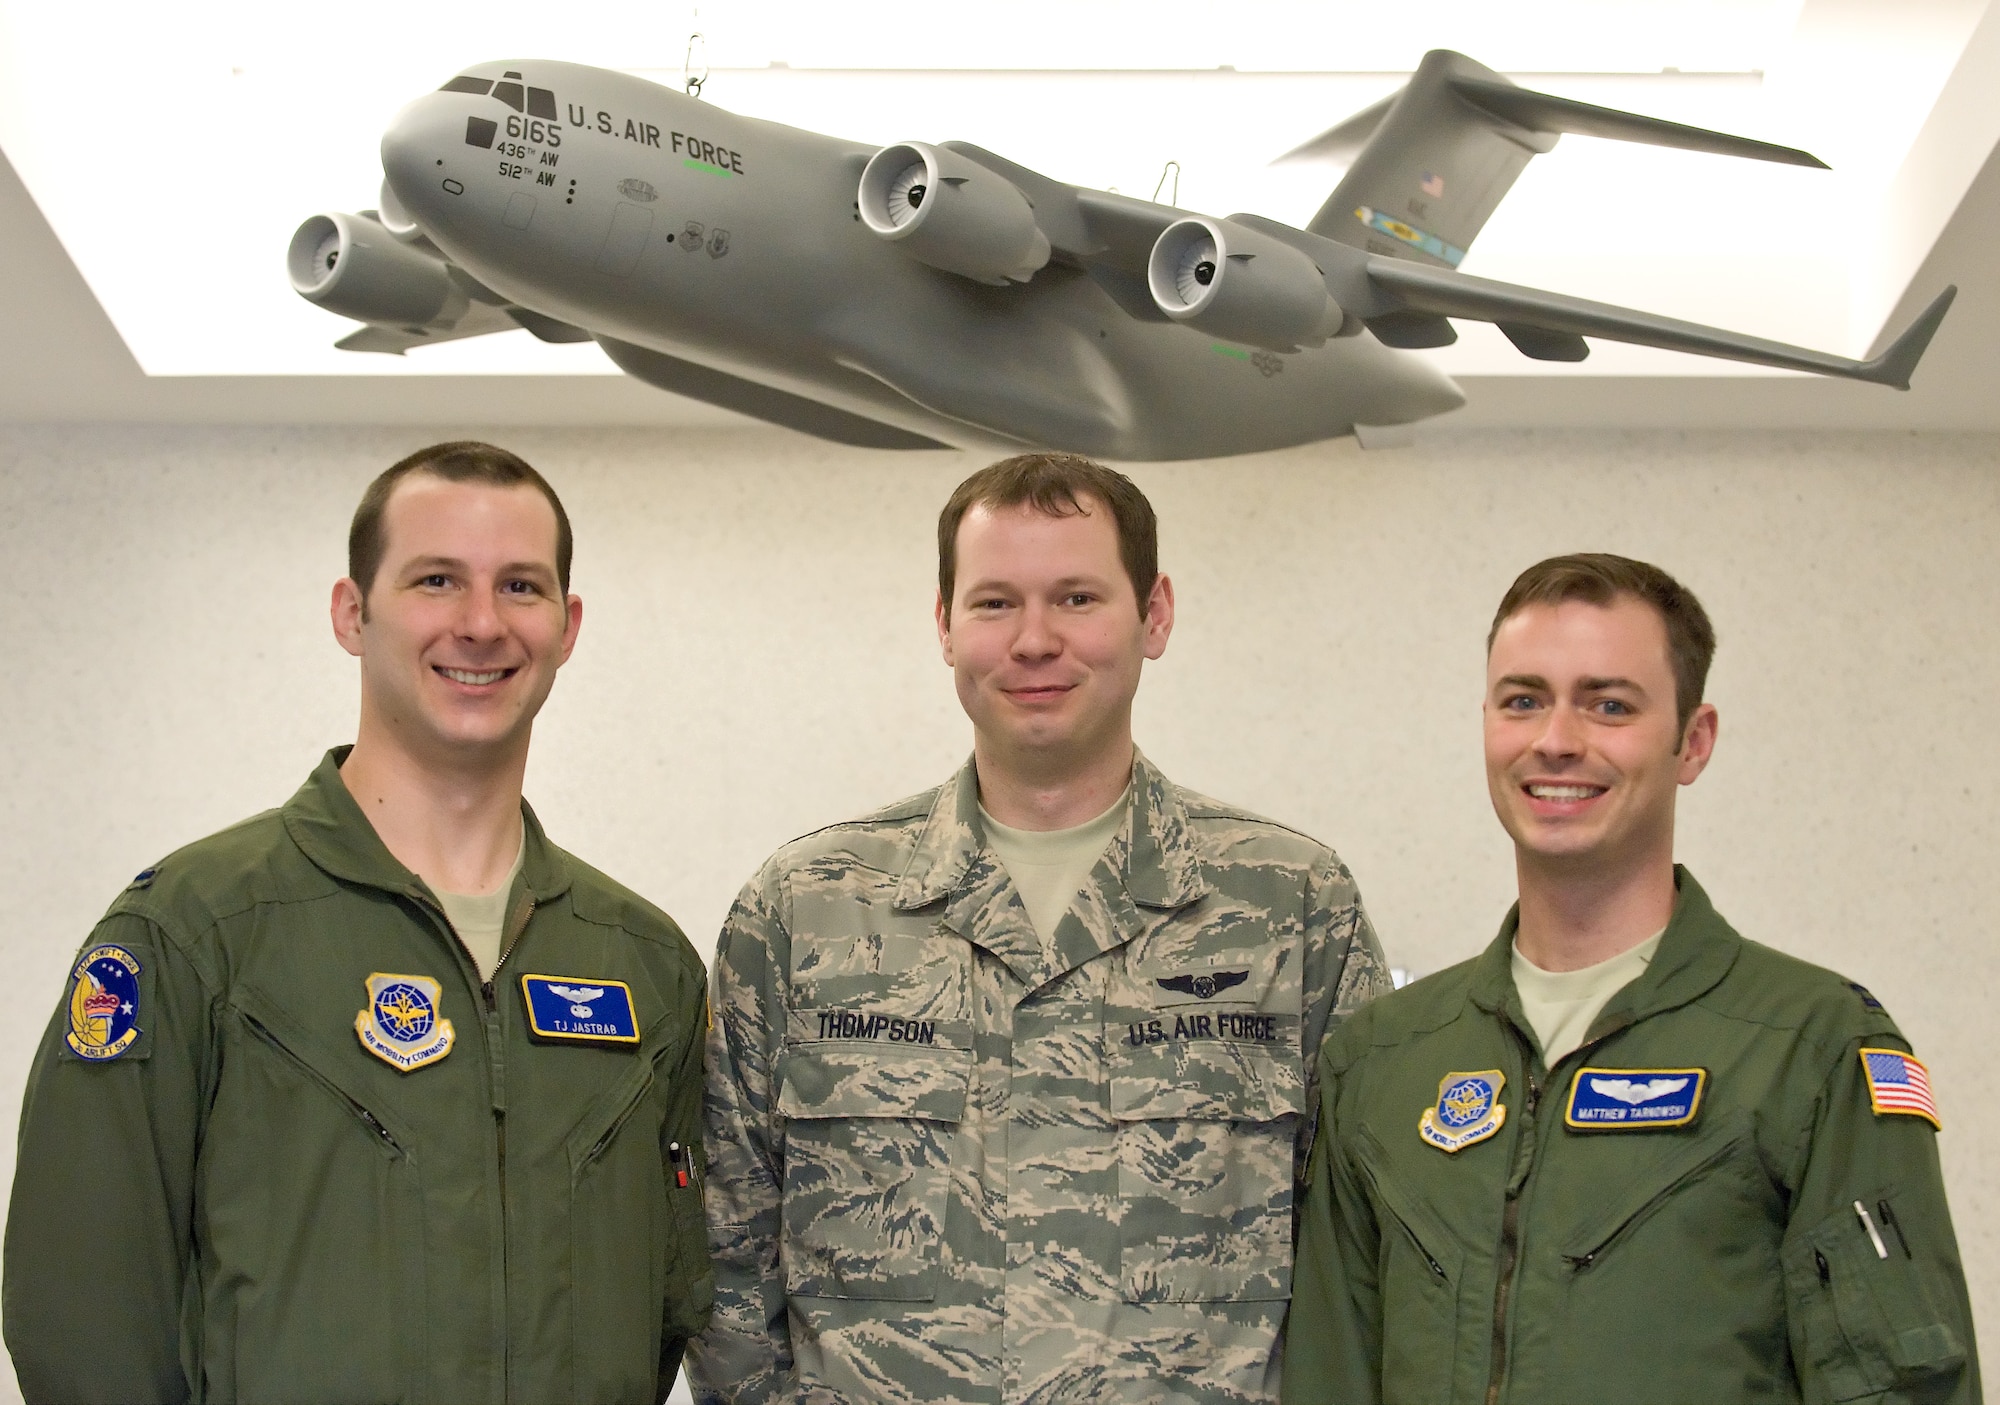 1st Lt. T.J. Jastrab (left), 3rd Airlift Squadron C-17 pilot, Staff Sgt. Ryan Thompson, C-17 loadmaster and Capt. Matt Tarnowski, C-17 aircraft commander, pose underneath a model C-17 March 18, 2011, in the 3rd Airlift Squadron building at Dover Air Force Base, Del. These Airmen were among the members who made the successful delivery of more than 70,000 pounds of humanitarian supplies March 12, 2011, to Misawa Air Base, Japan. (U.S. Air Force photo by Roland Balik)